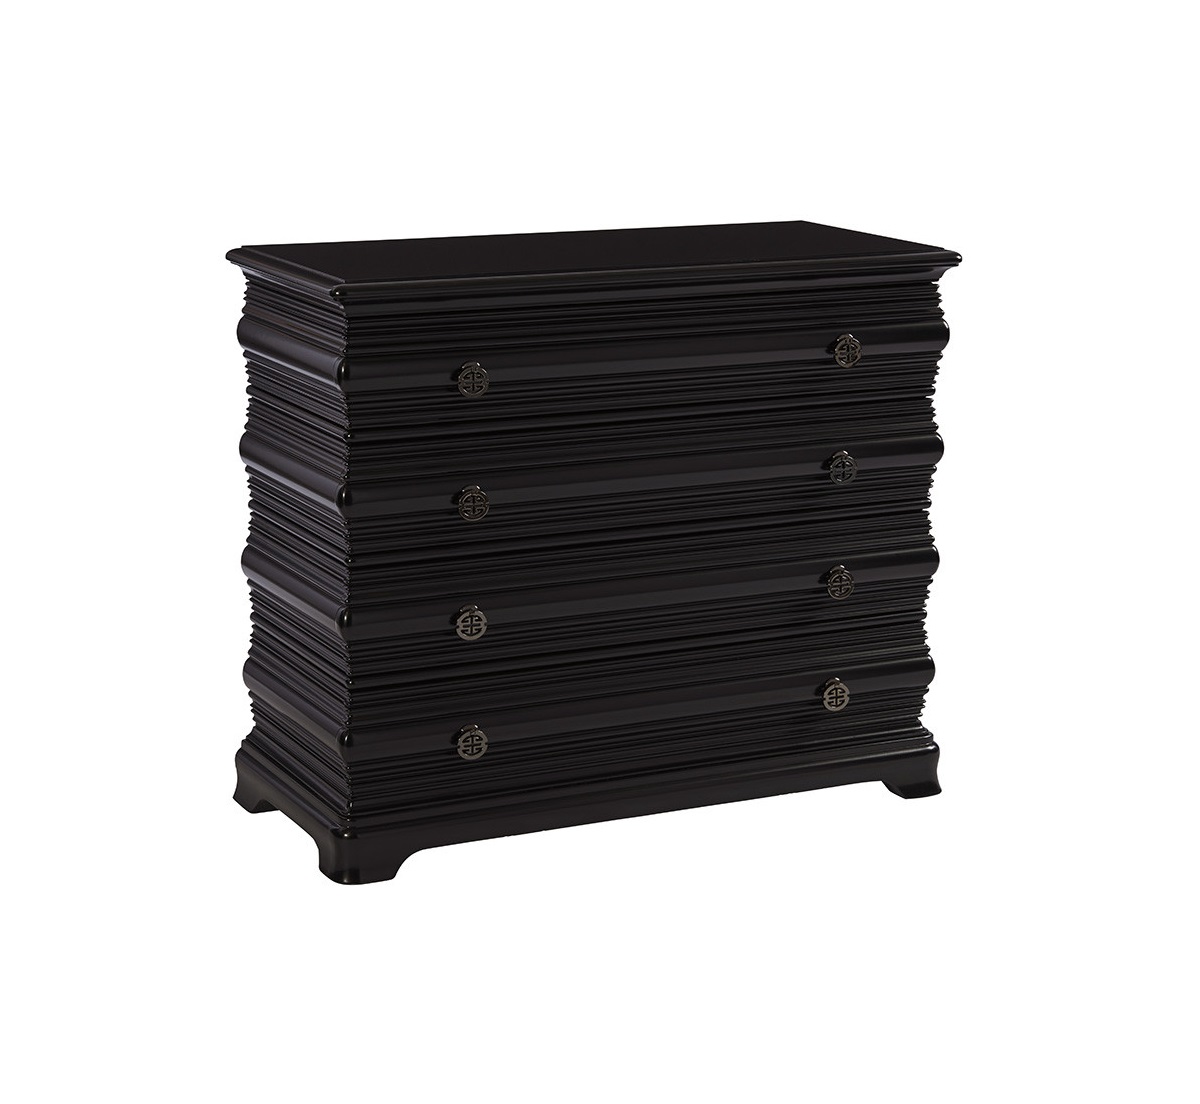 Chaparal Bachelor's Lexington Wooden Chest Of Drawers for Sale Brooklyn, New York 